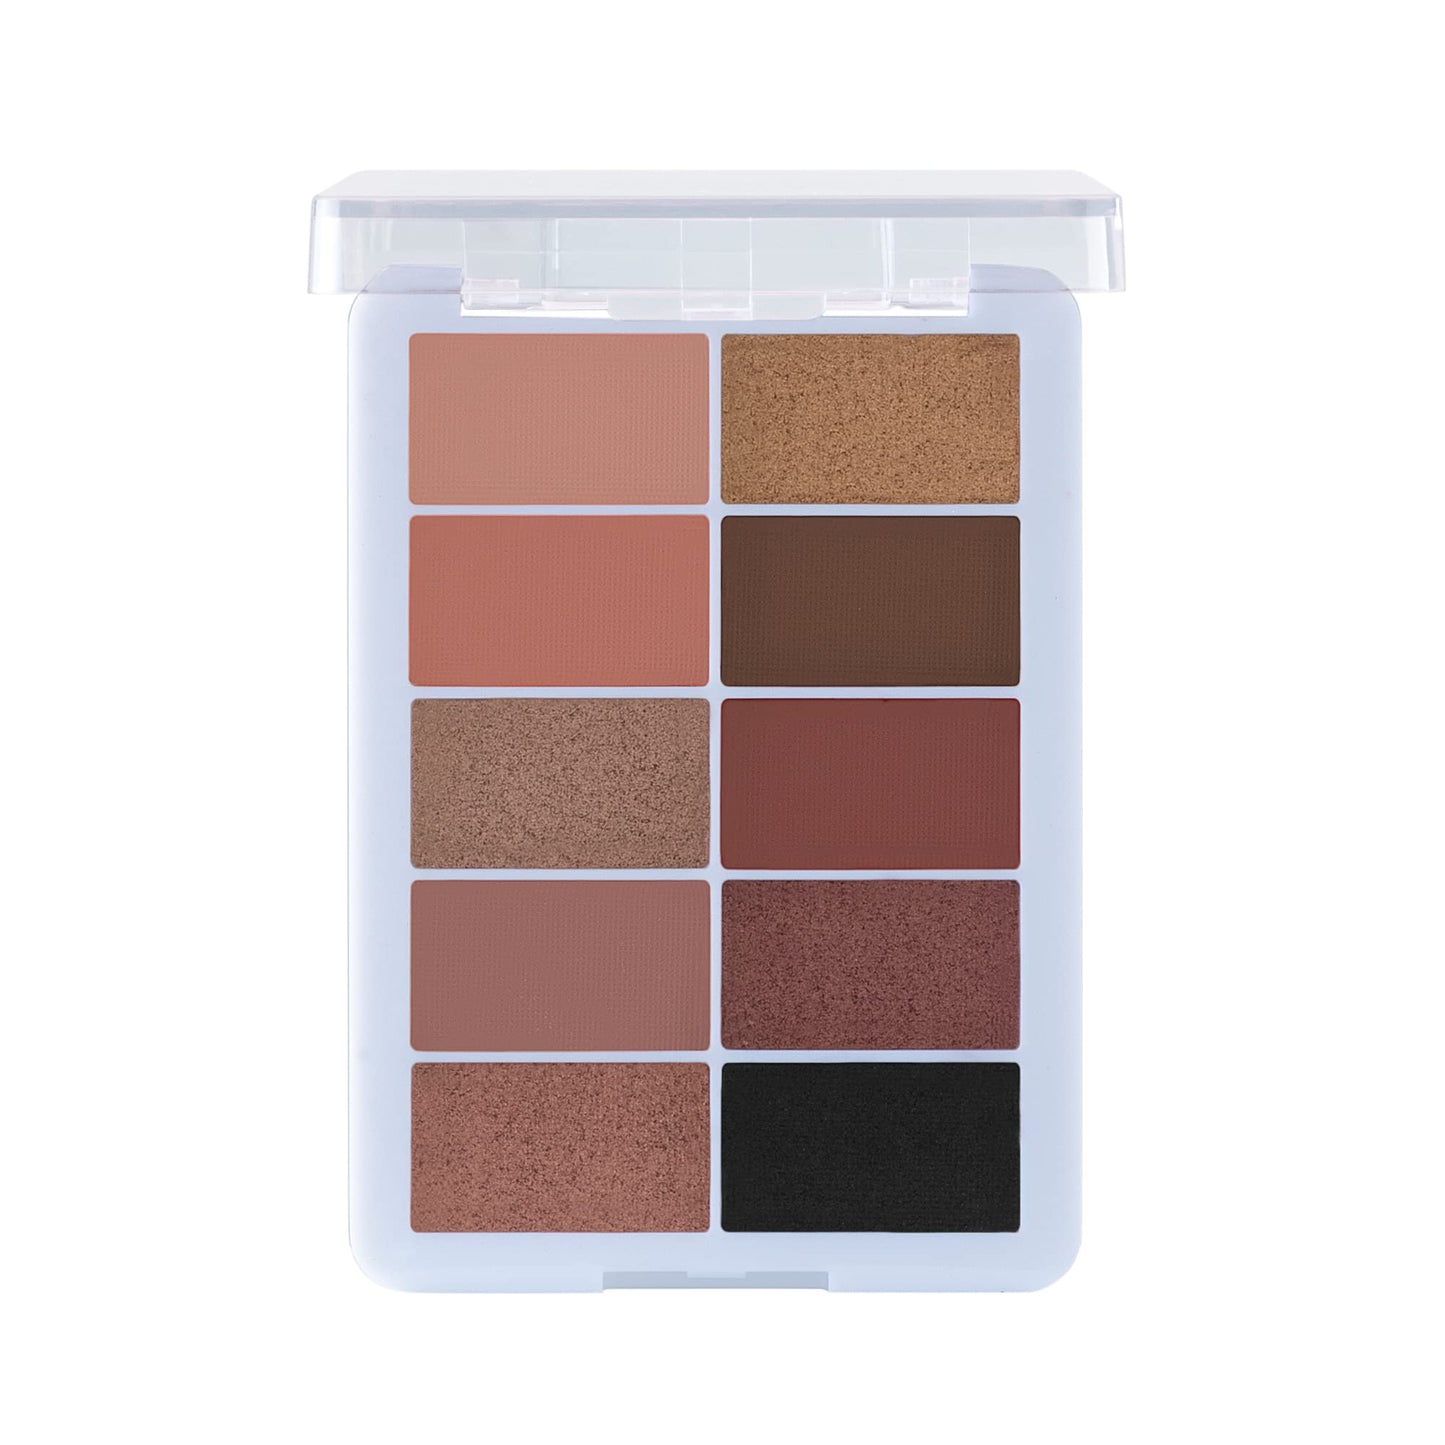 MARS Shimmer and Matte Eyeshadow Palette | 10 Highly Pigmented & Blendable Shades (10.0 gm) (SHADE-02)